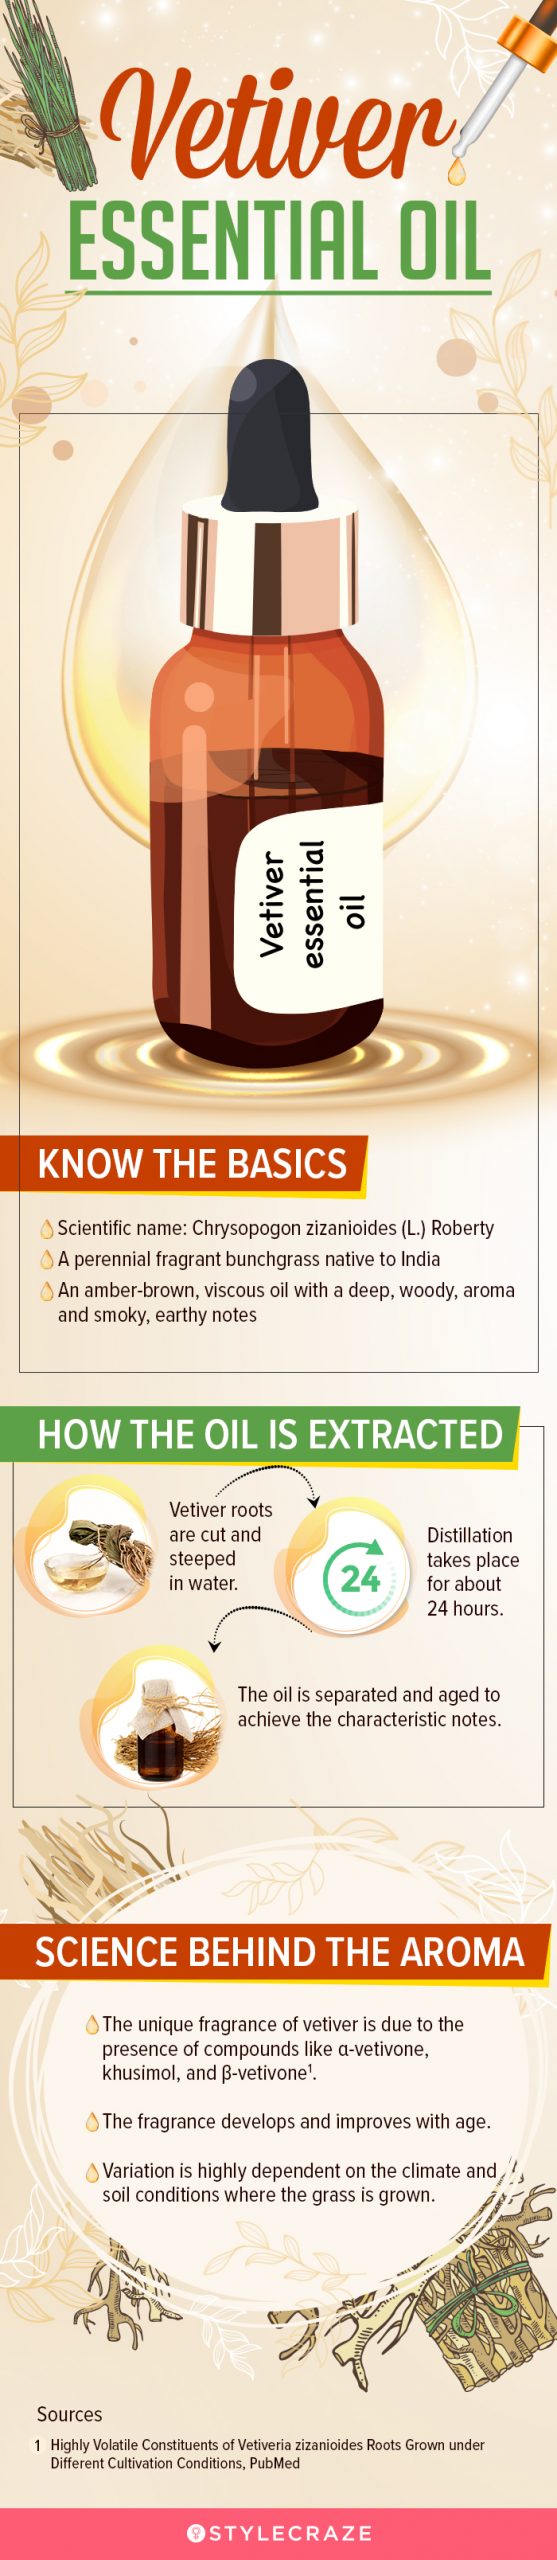 vetiver essential oil (infographic)